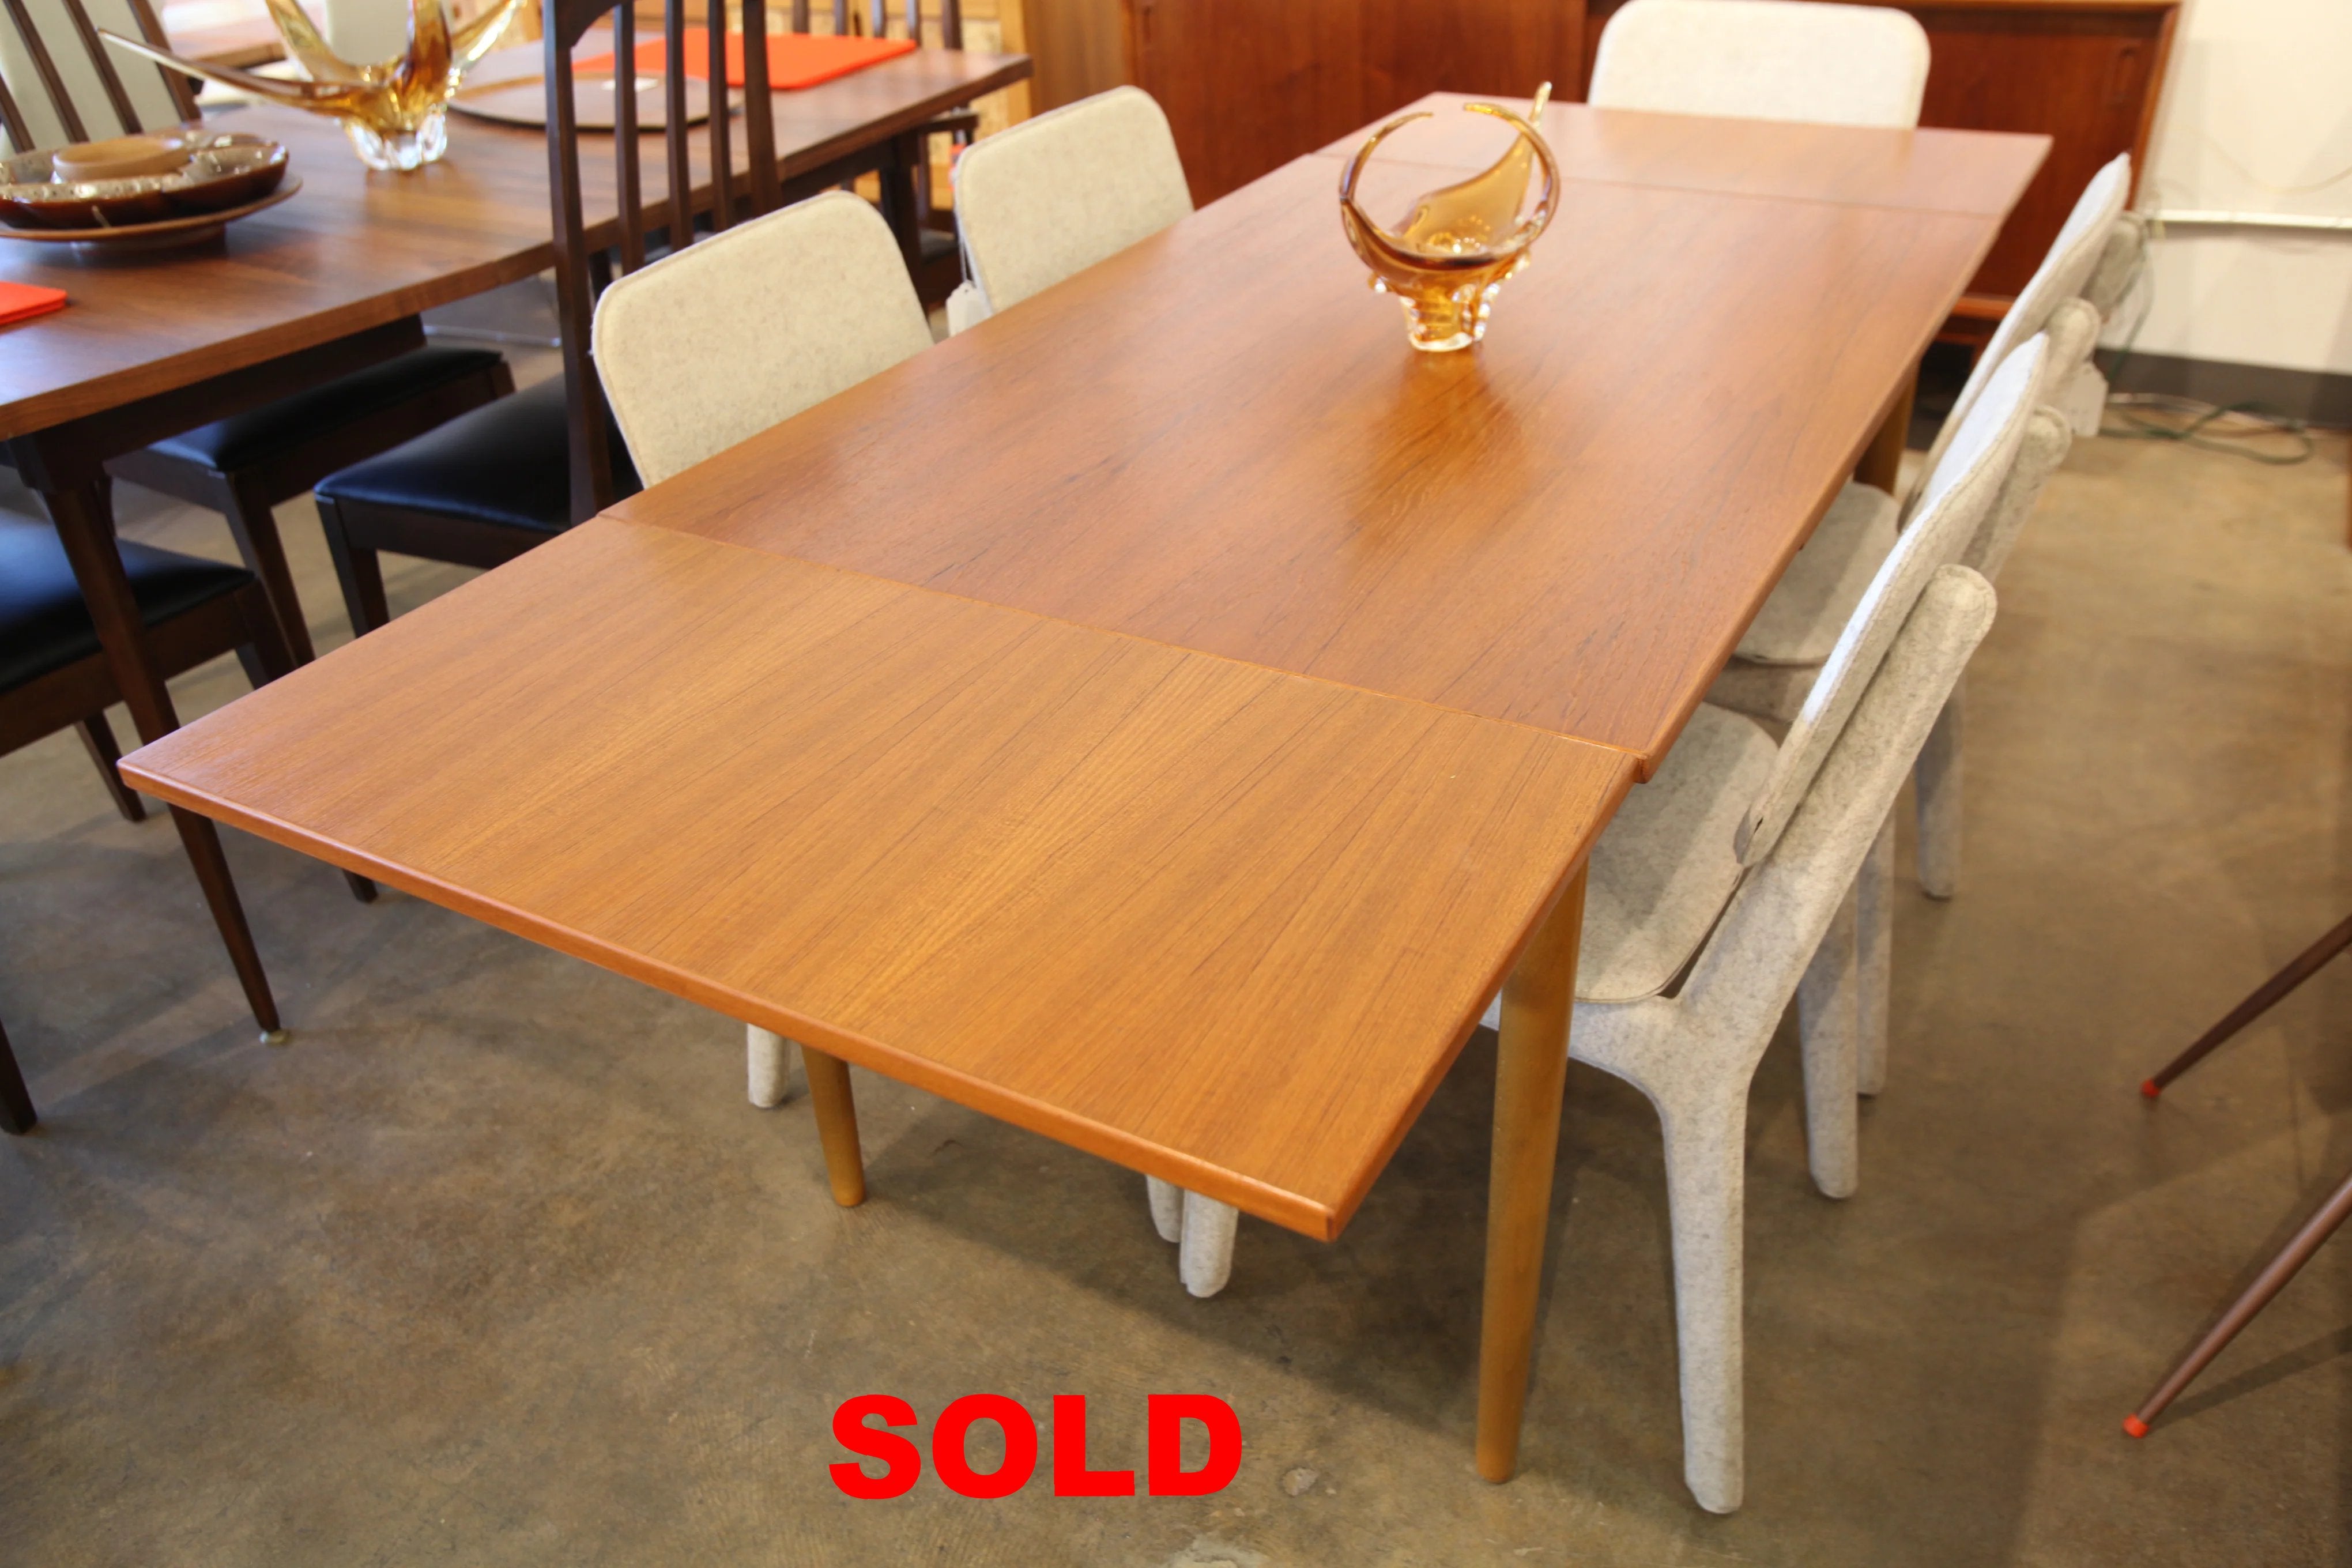 Vintage Teak Dining Table w/ Pullout Extensions (79" x 32")(47.75" x 32") 29"H